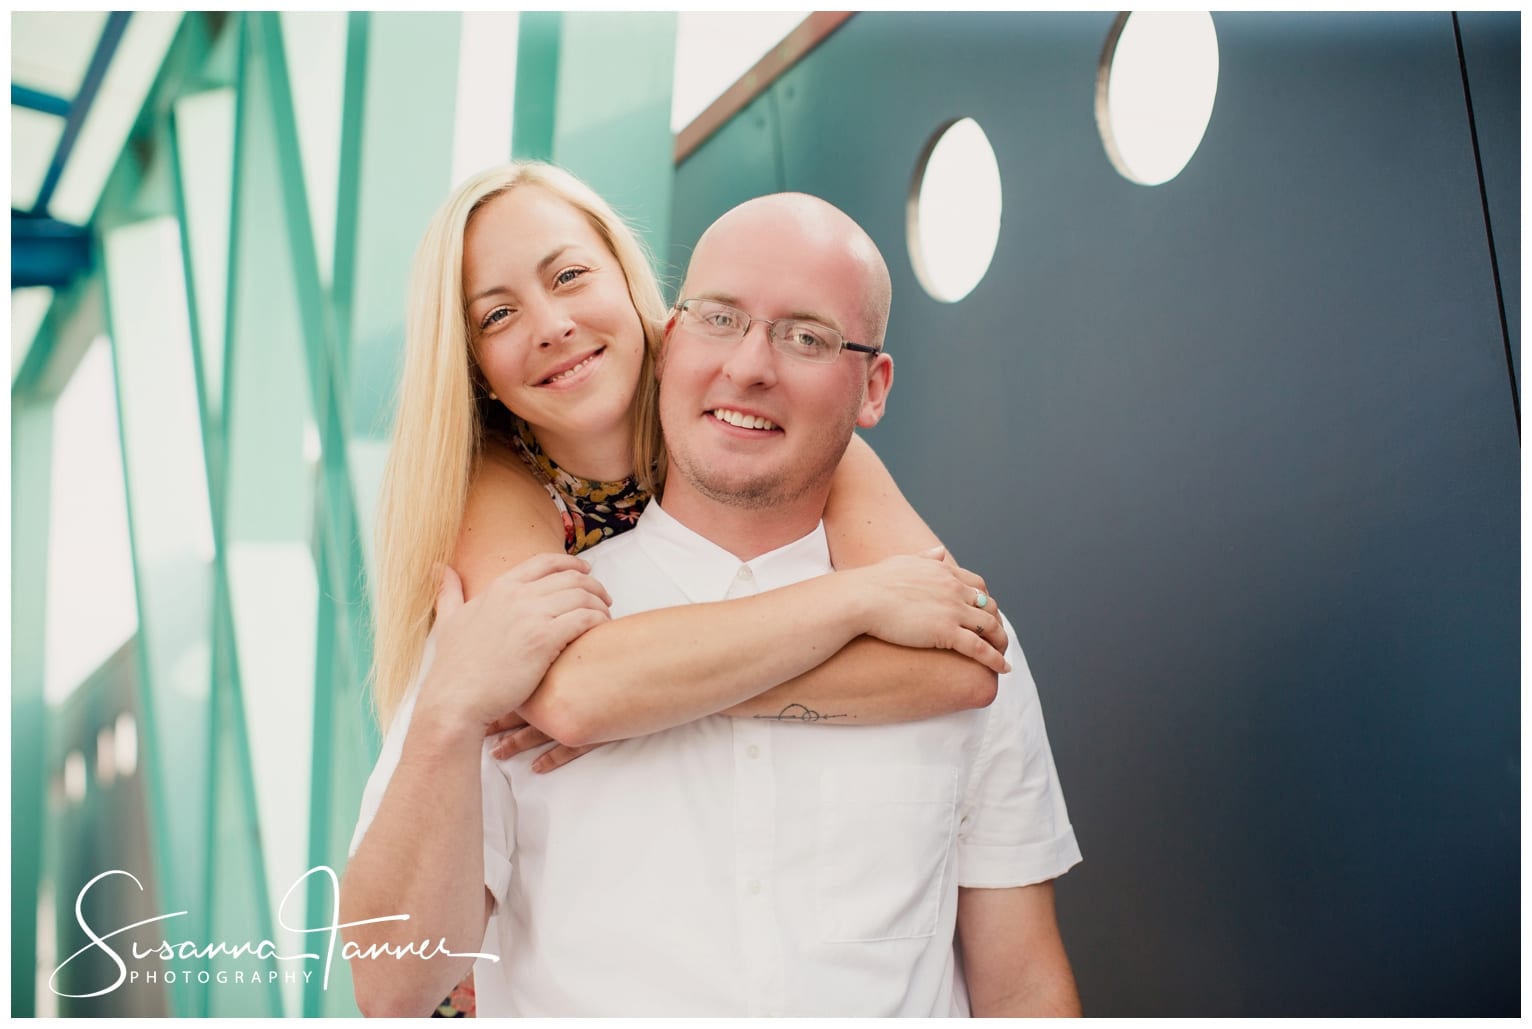 Fountain Square Indianapolis Photography Engagement Session female standing behind male with arms around him smiling